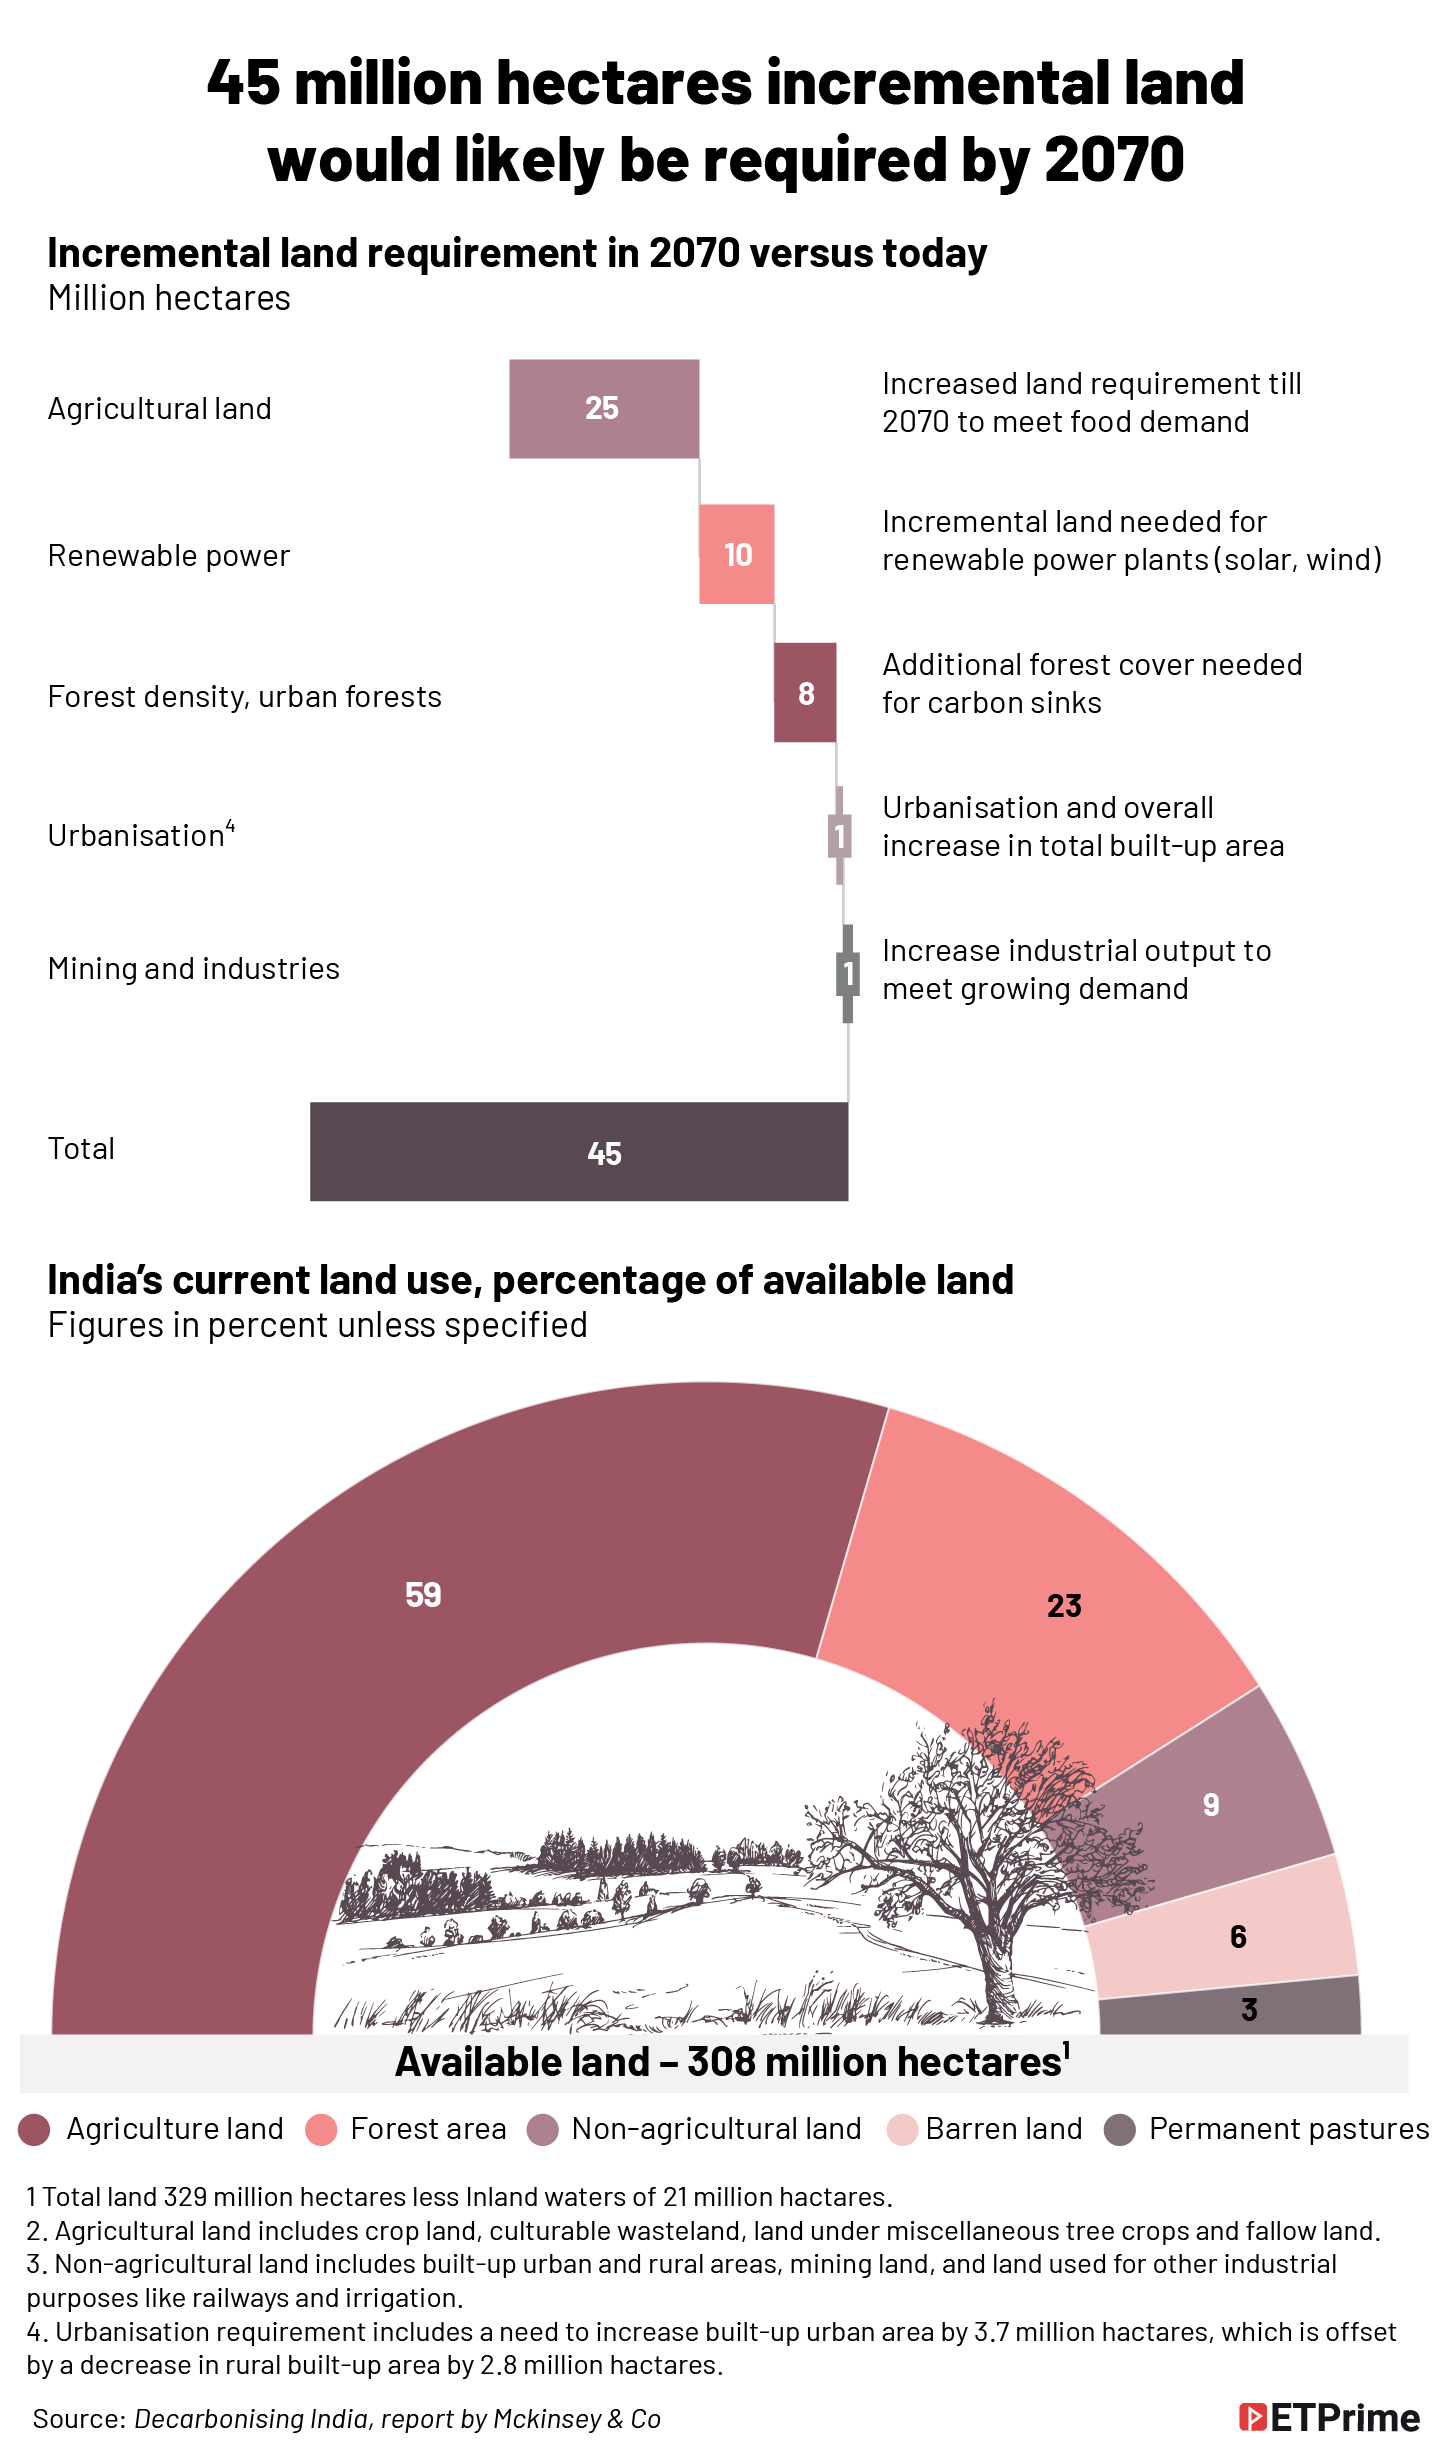 45 million ha incremental land would likely be required in the accelerated scenario by 2070@2x